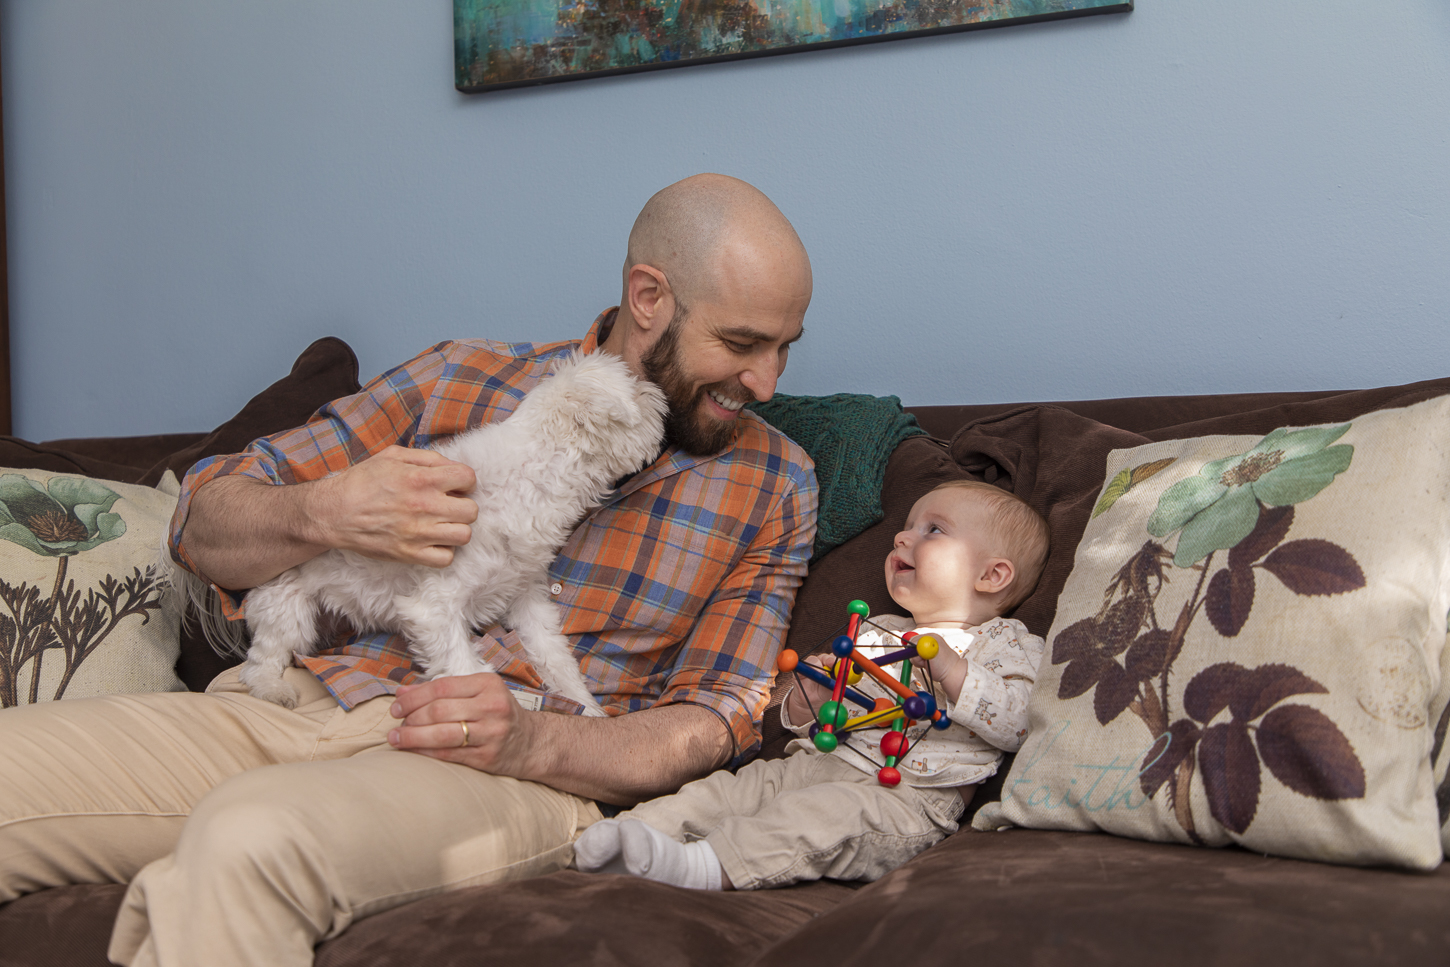 Arthur Migliazza, left, sits on his couch while looking at his newborn baby. Arthur is holding a small dog, and wearing an orange and blue plaid flannel shirt and khaki pants. His newborn is wearing a white onesie and is holding a toy.